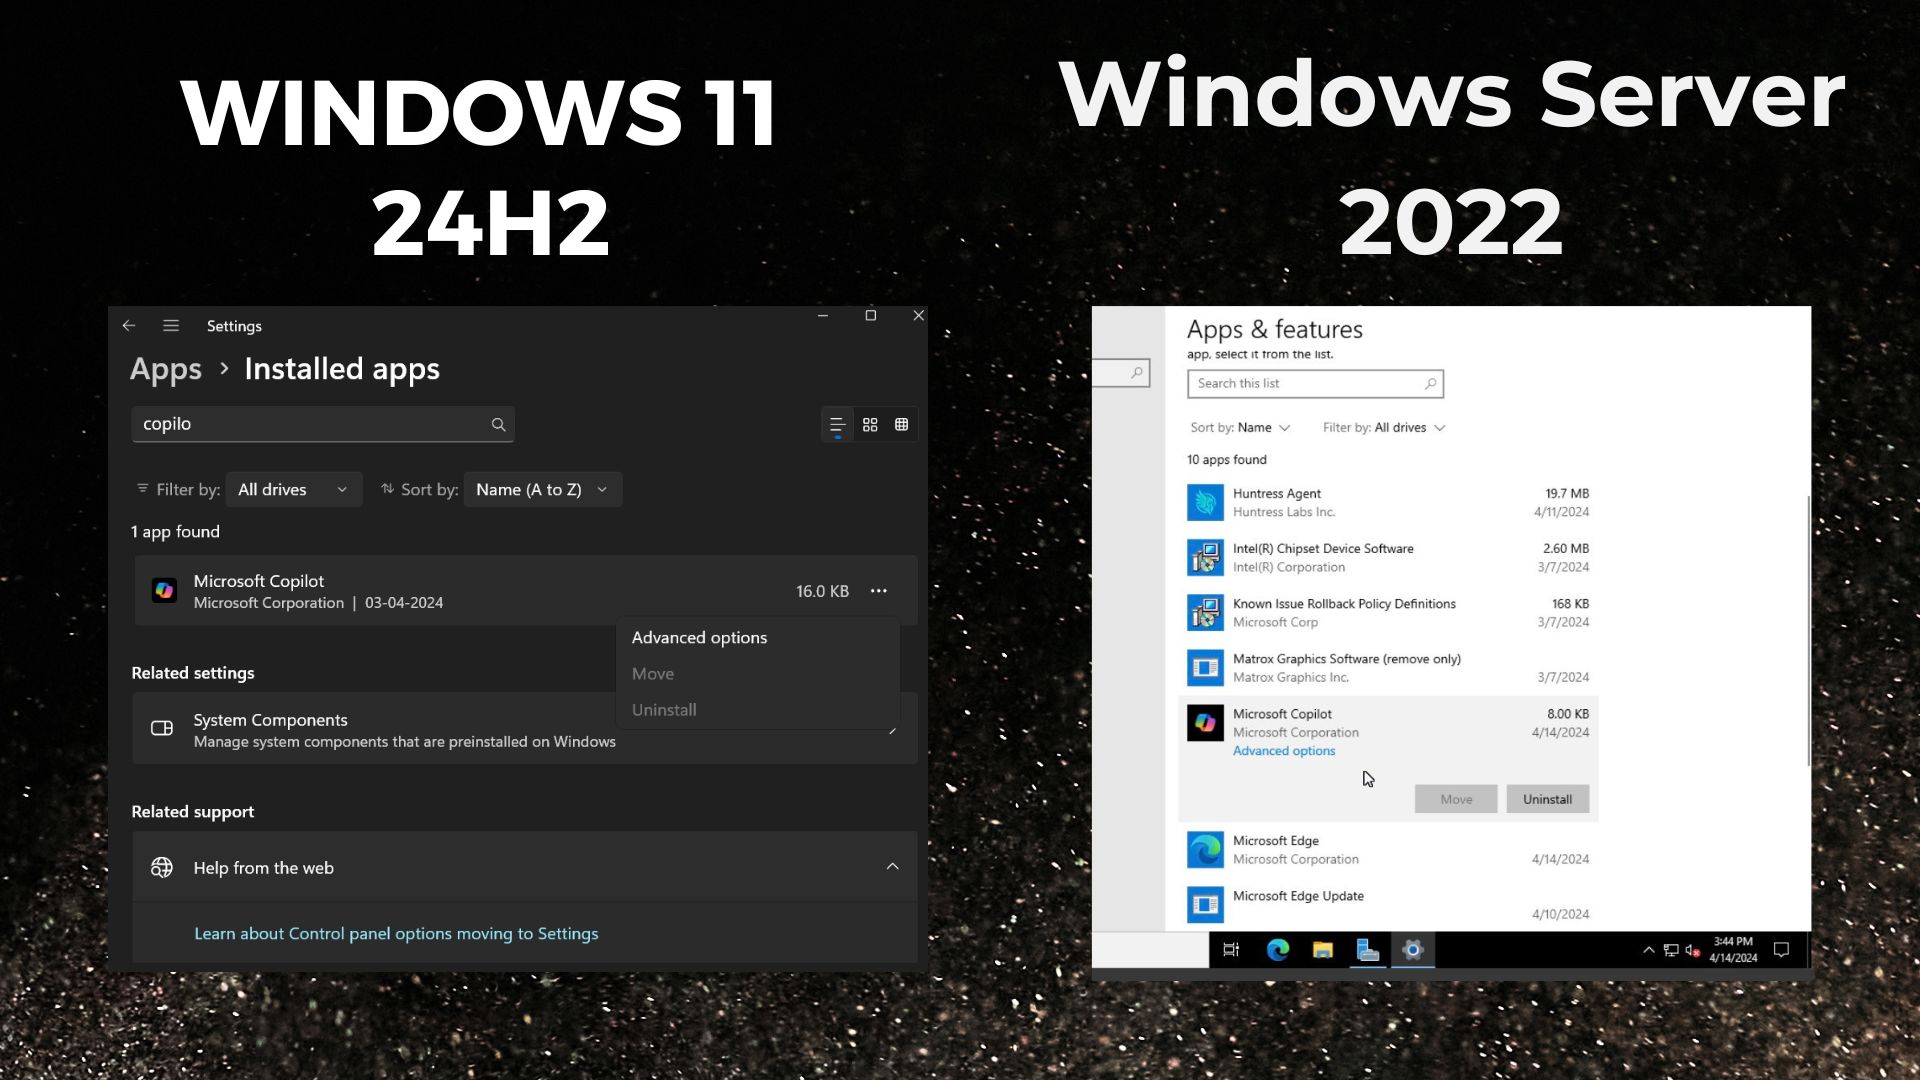 Microsoft Copilot app spotted in Windows Server 2022, but it does nothing for now copilot-app-uninstallation-in-Windows-11-and-Windows-server-2022.jpg